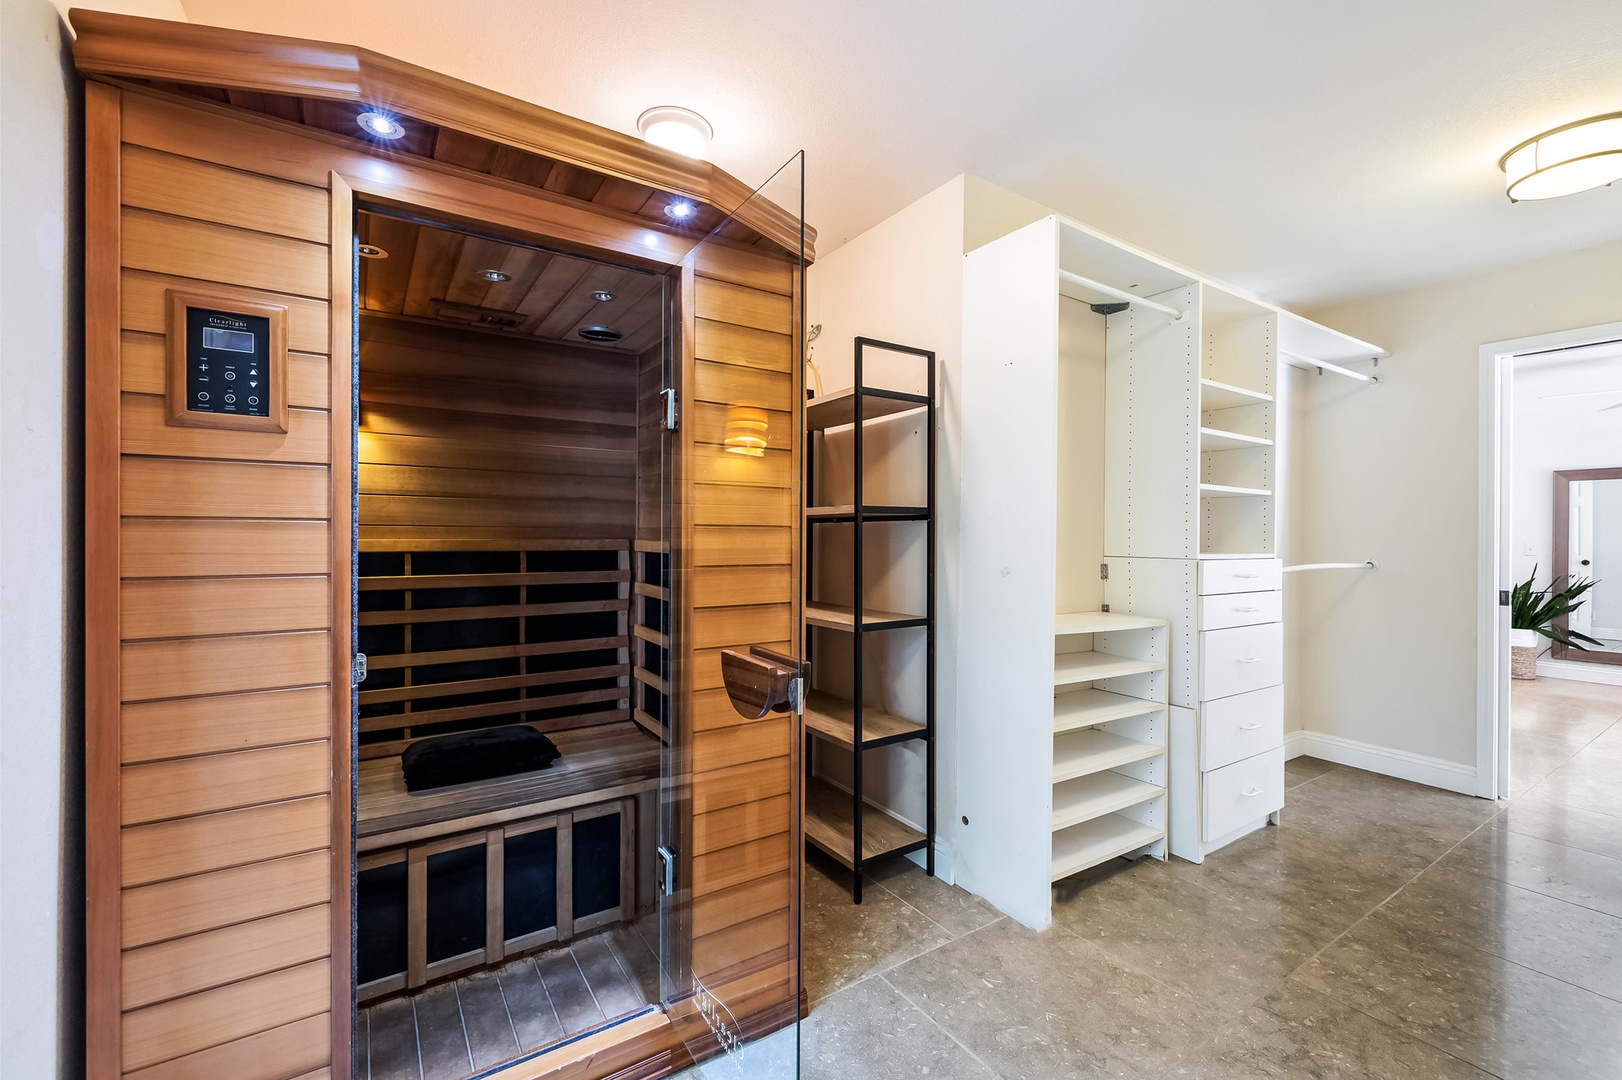 Honolulu Vacation Rentals, Hale Ho'omaha - There's also a private sauna in the primary ensuite